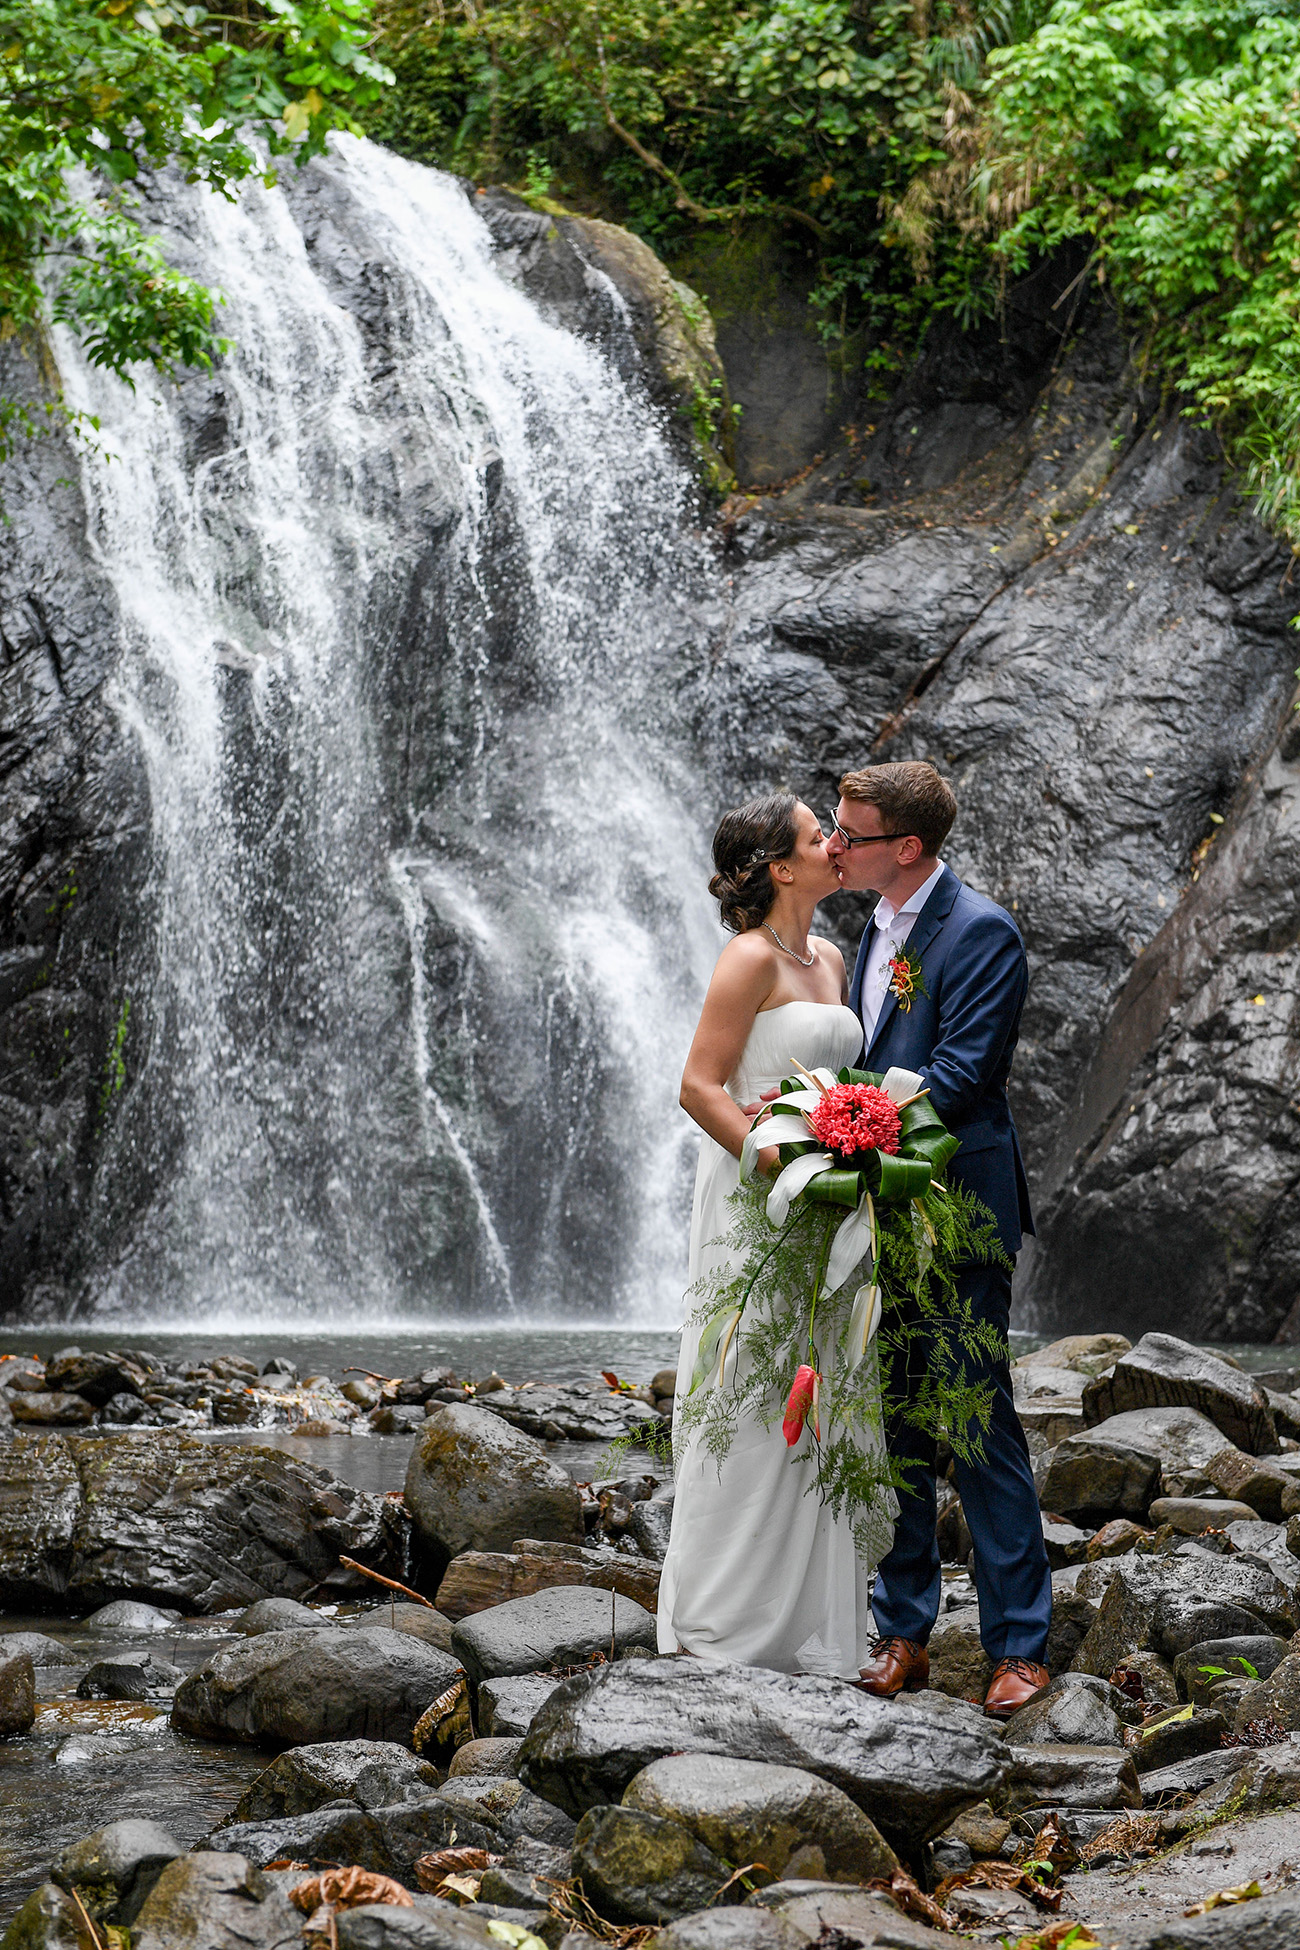 German bride and groom kiss in front of stunning waterfall